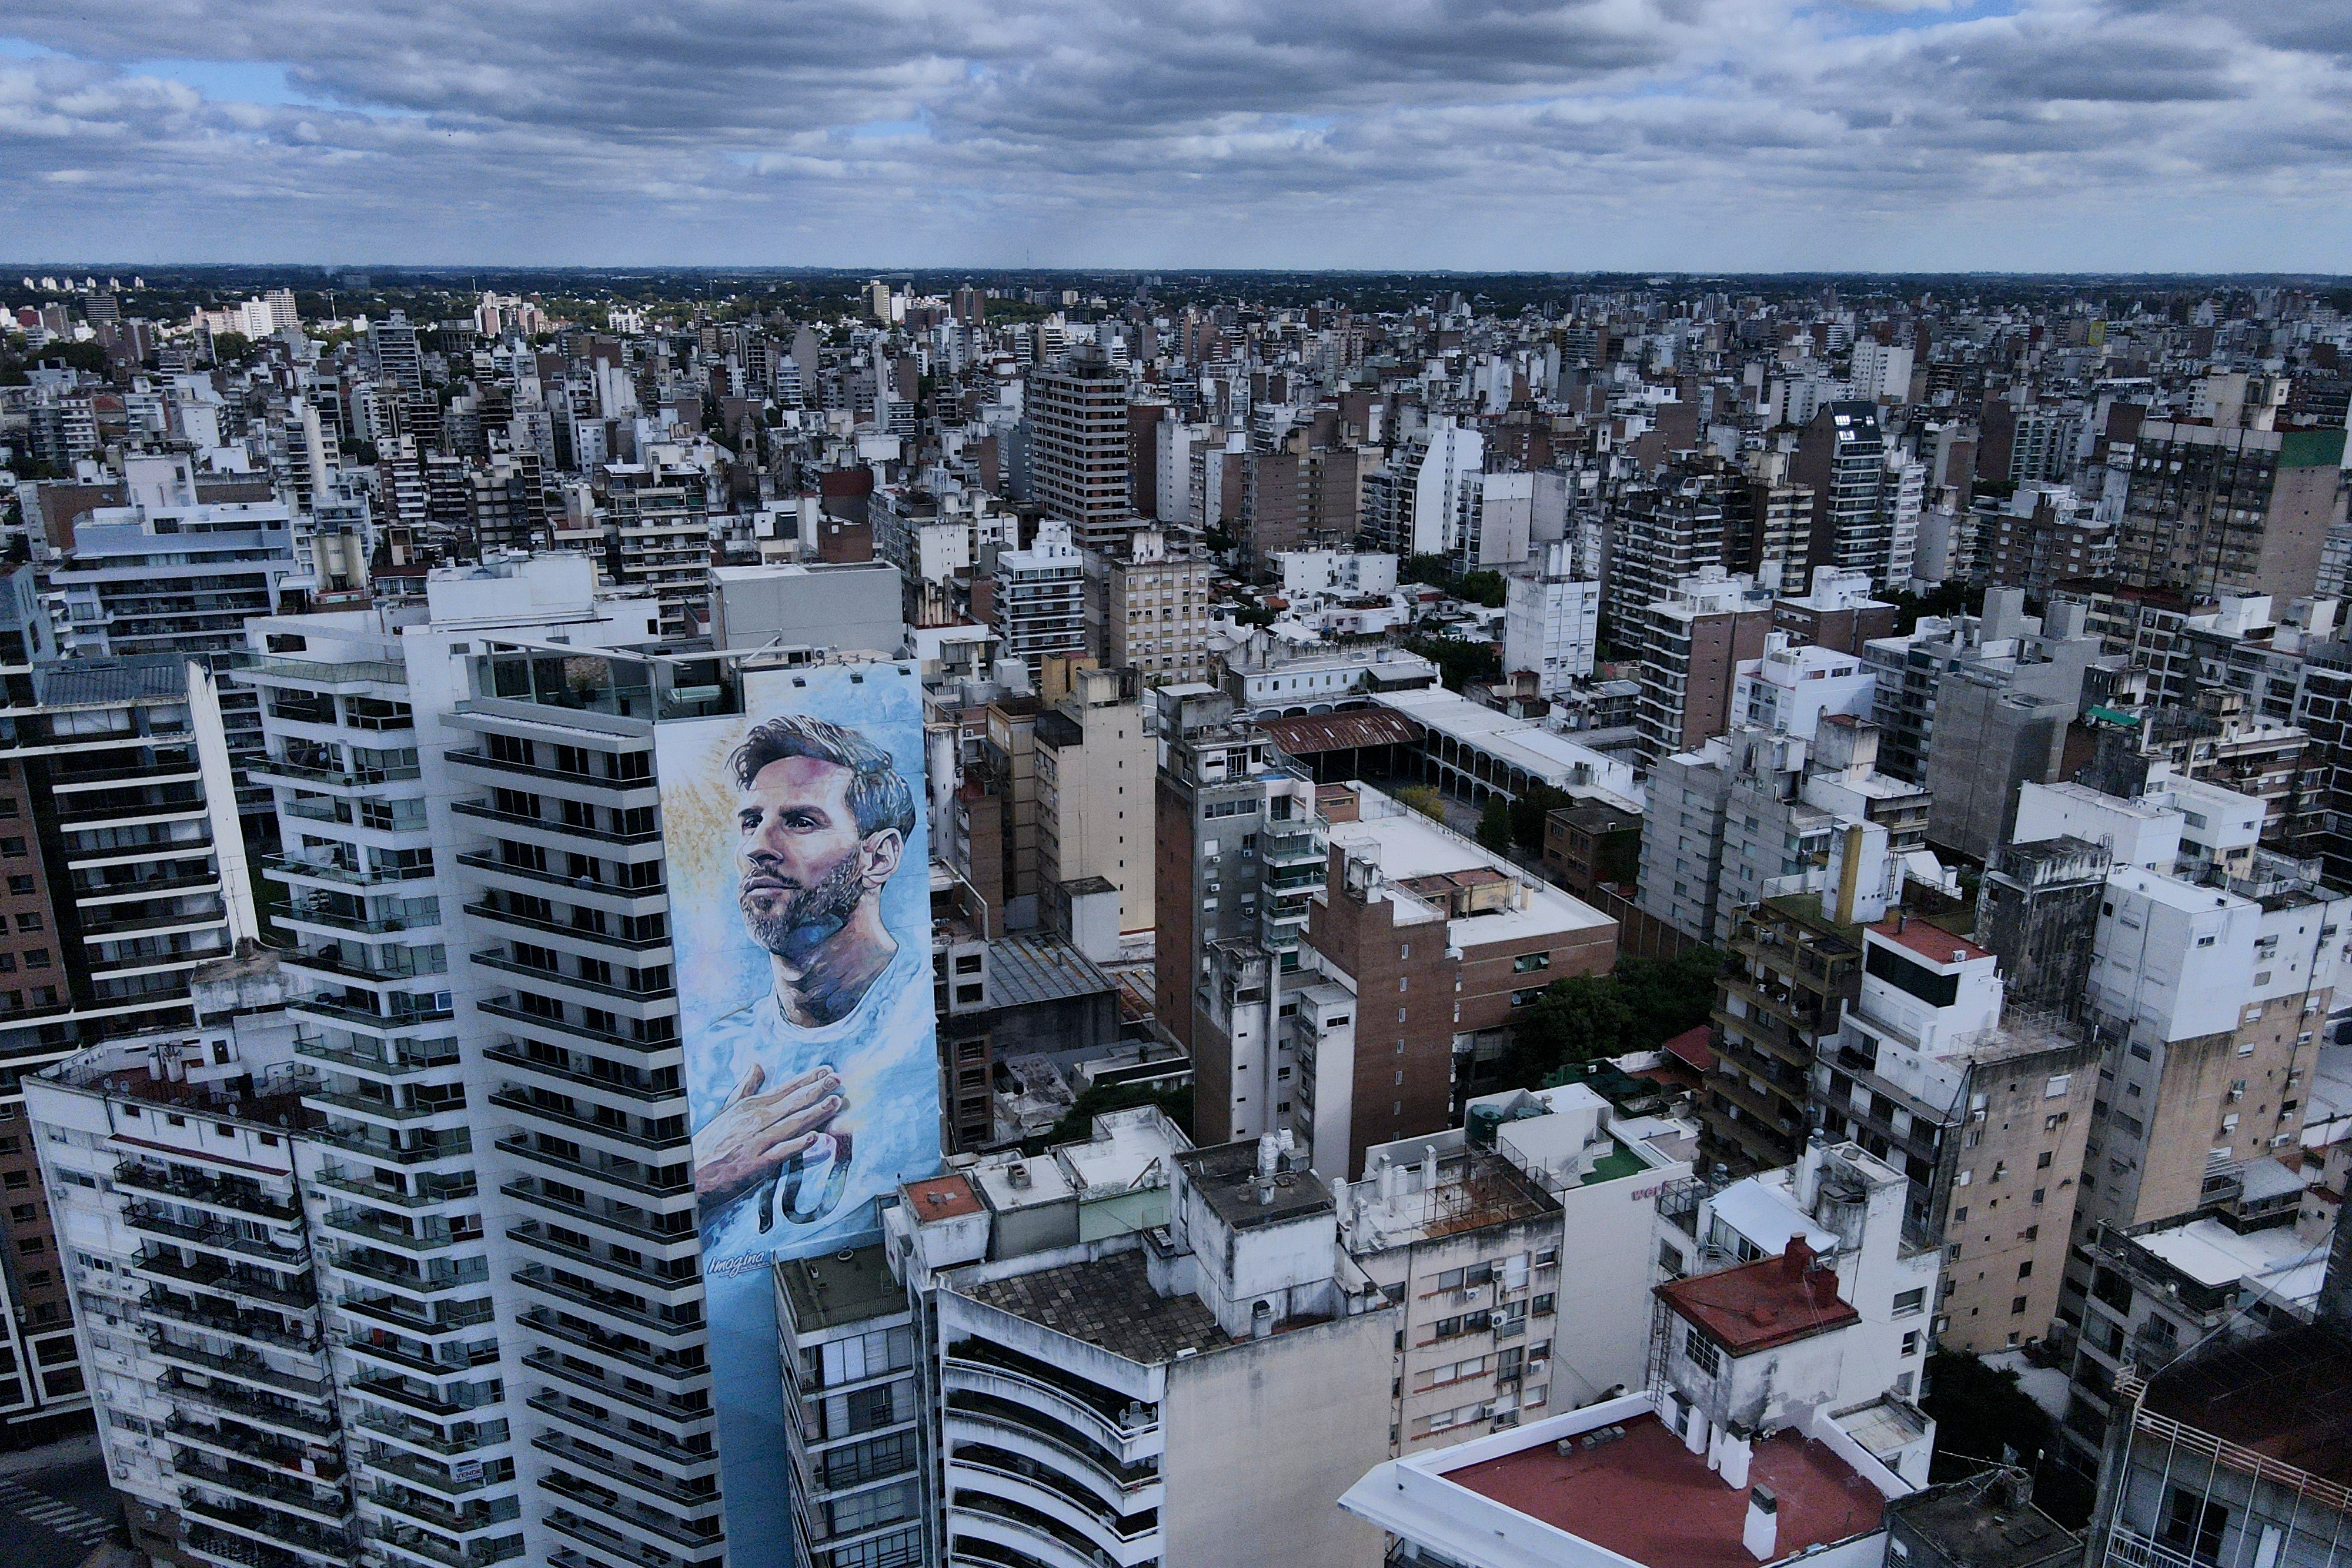 A mural of soccer player Lionel Messi covers a building in Rosario, Argentina